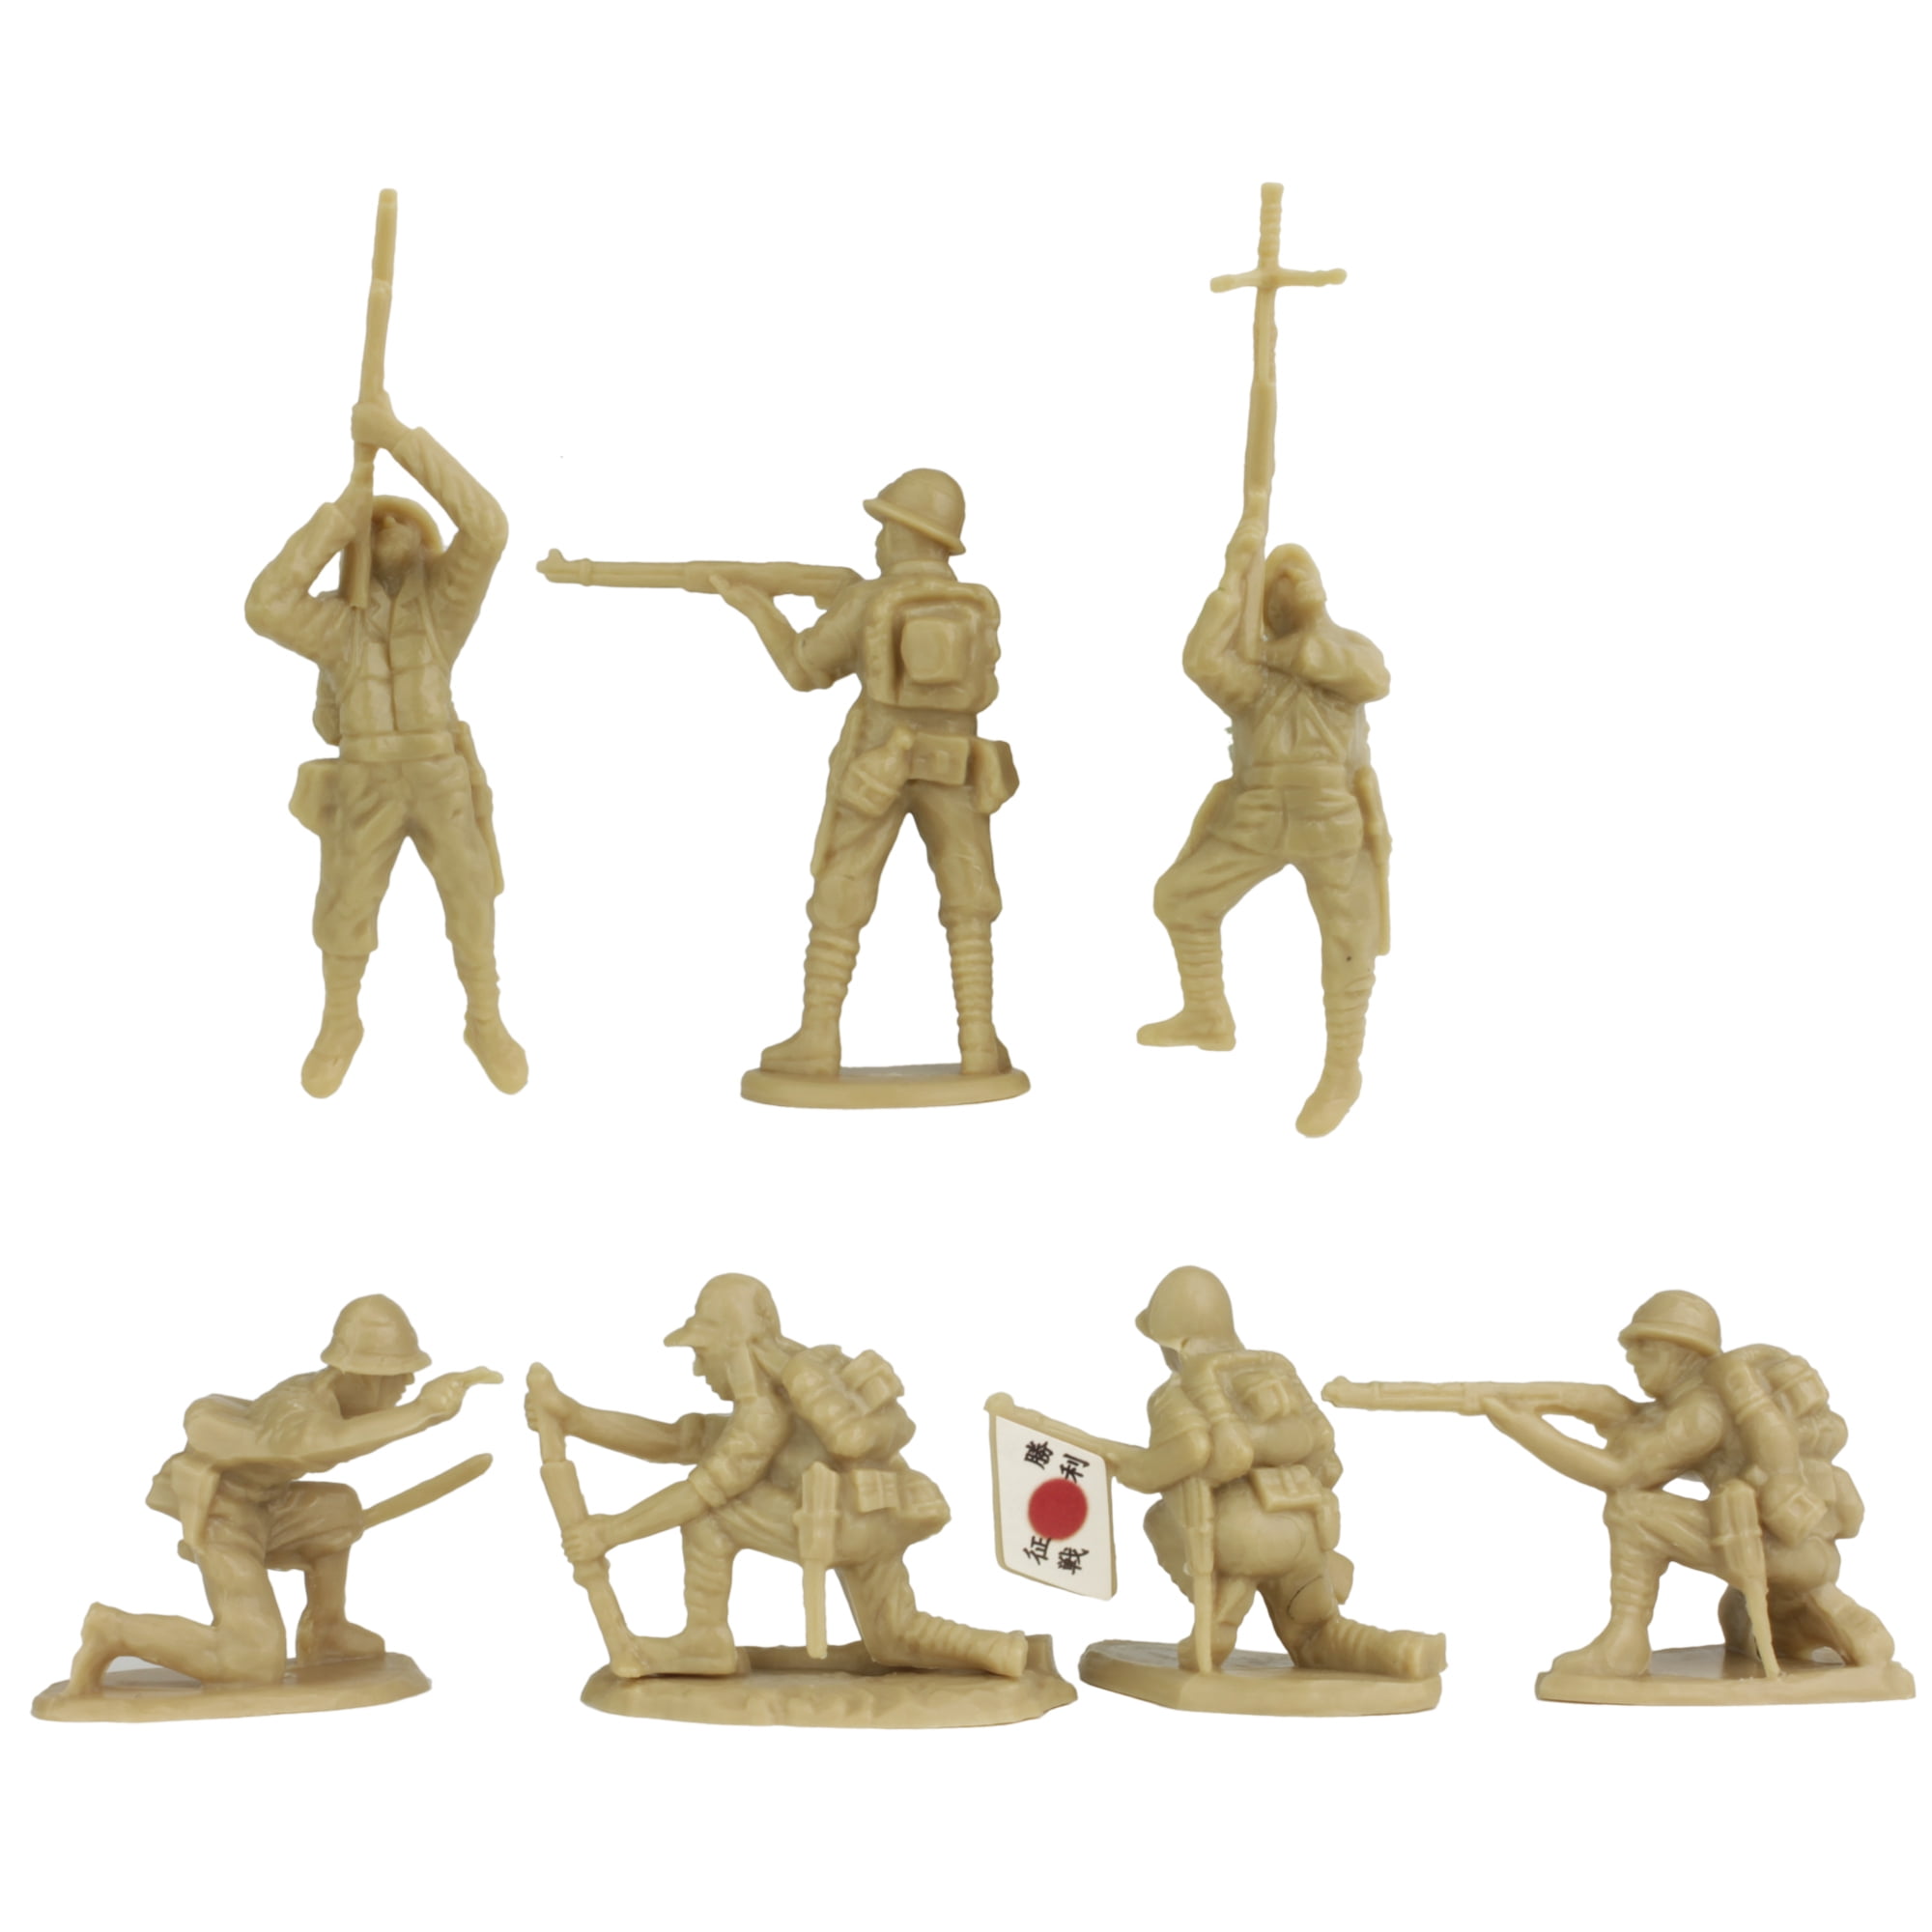 BMC Ww2 Iwo Jima Plastic Army Men 32 American and Japanese Soldier Figures for sale online 